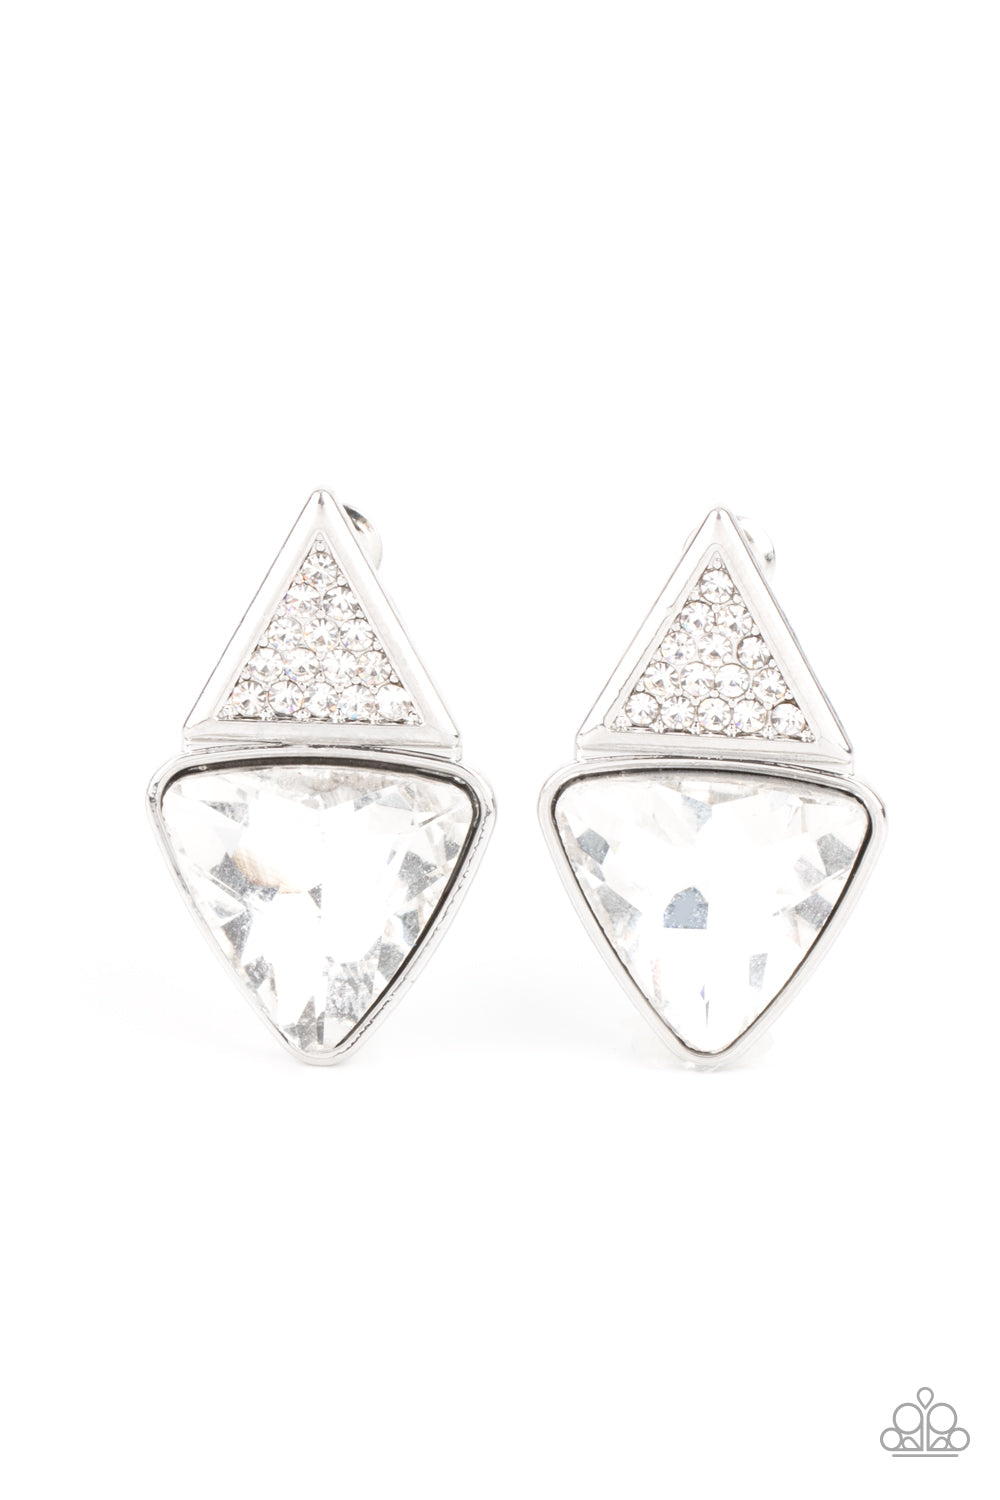 Paparazzi Risky Razzle - White Earrings - A Finishing Touch Jewelry